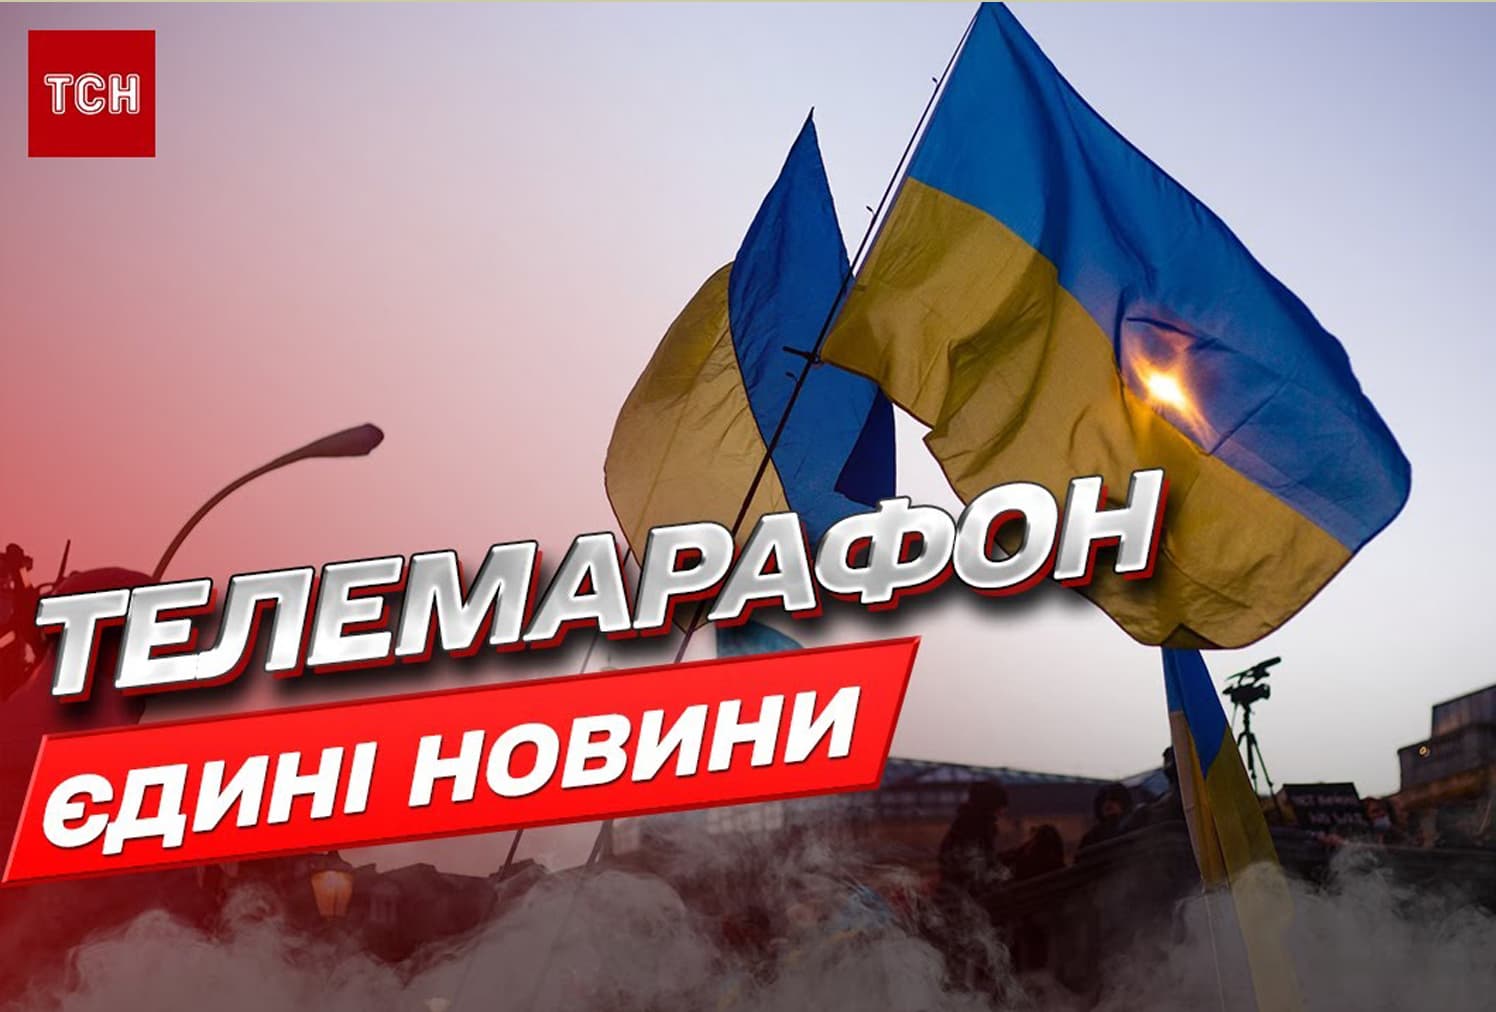 thumb - On Oct. 9 I will be doing a live interview on Ukraine’s largest TV network 1+1